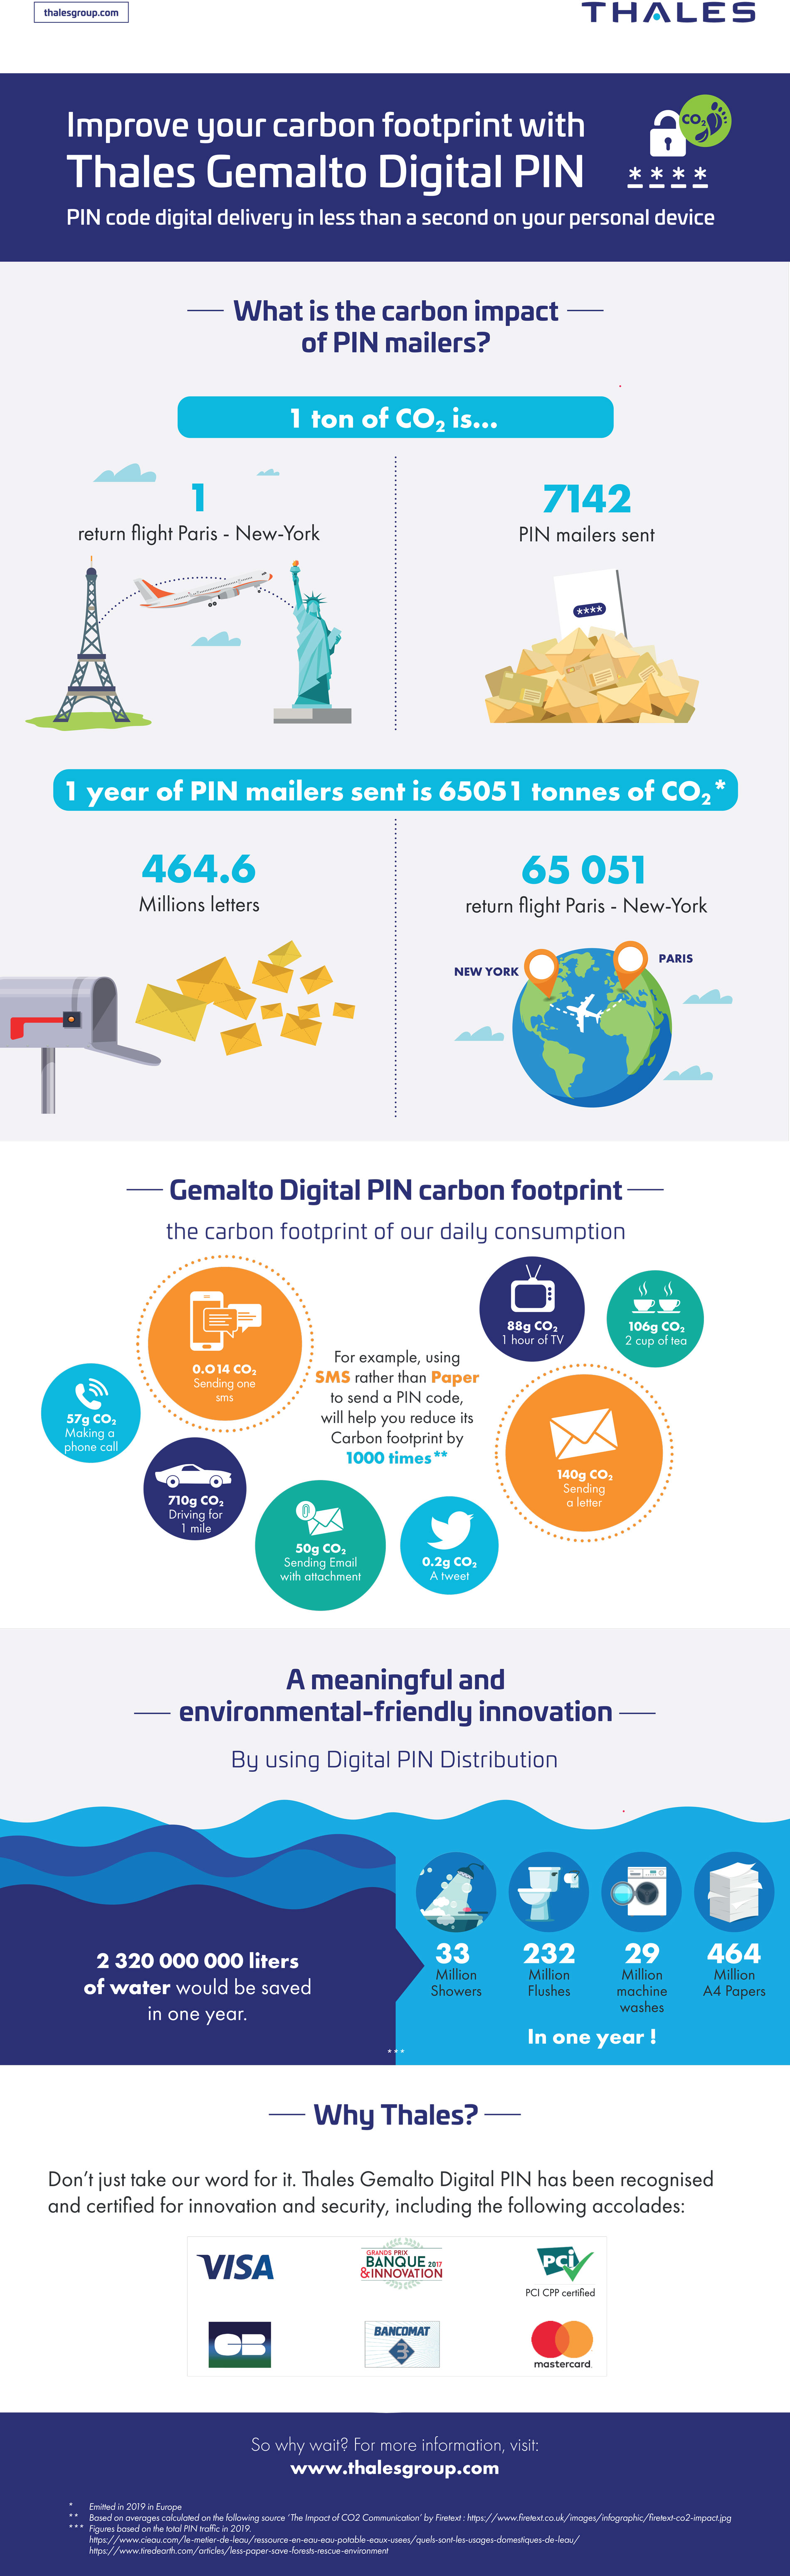 Improve your carbon footprint with Thales Gemalto Digital Pin